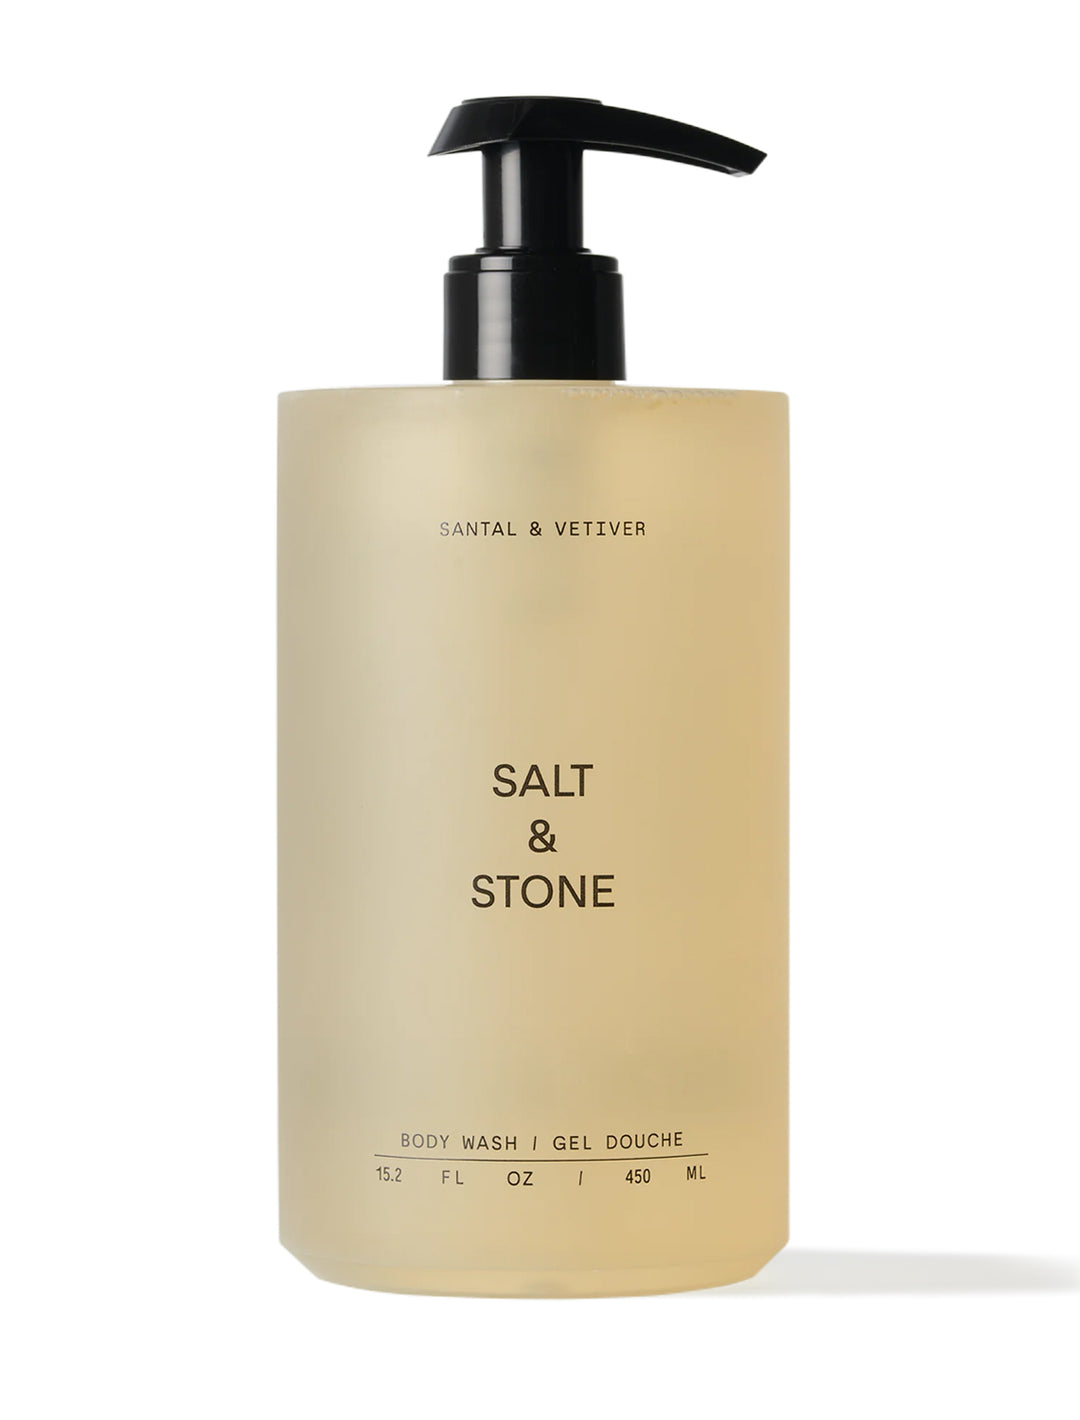 Front view of Salt & Stone's body wash | santal & vetiver.